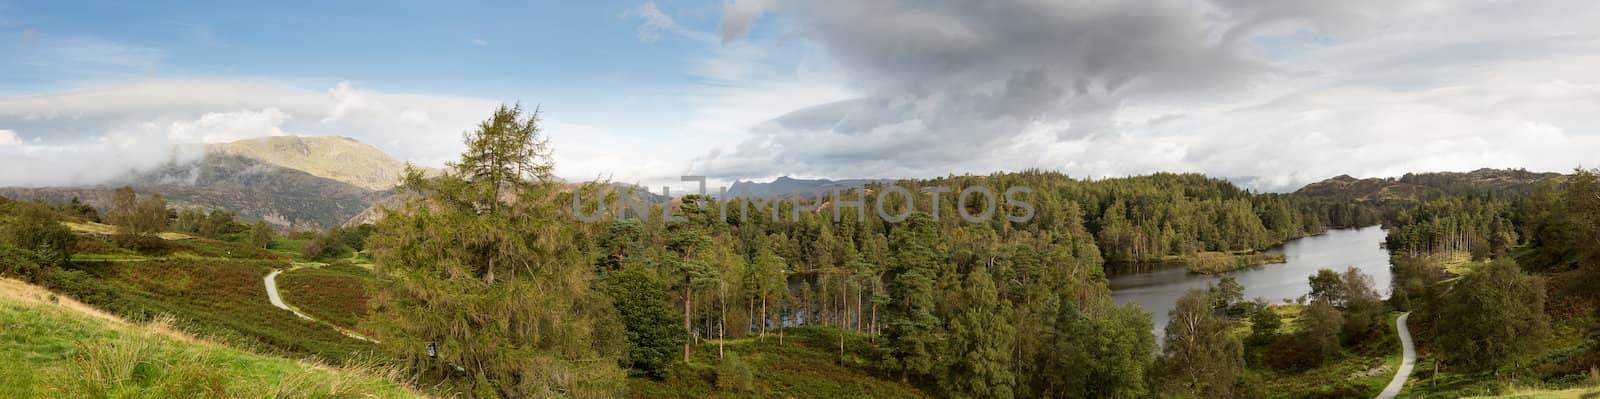 View over Tarn Hows in English Lake District by steheap